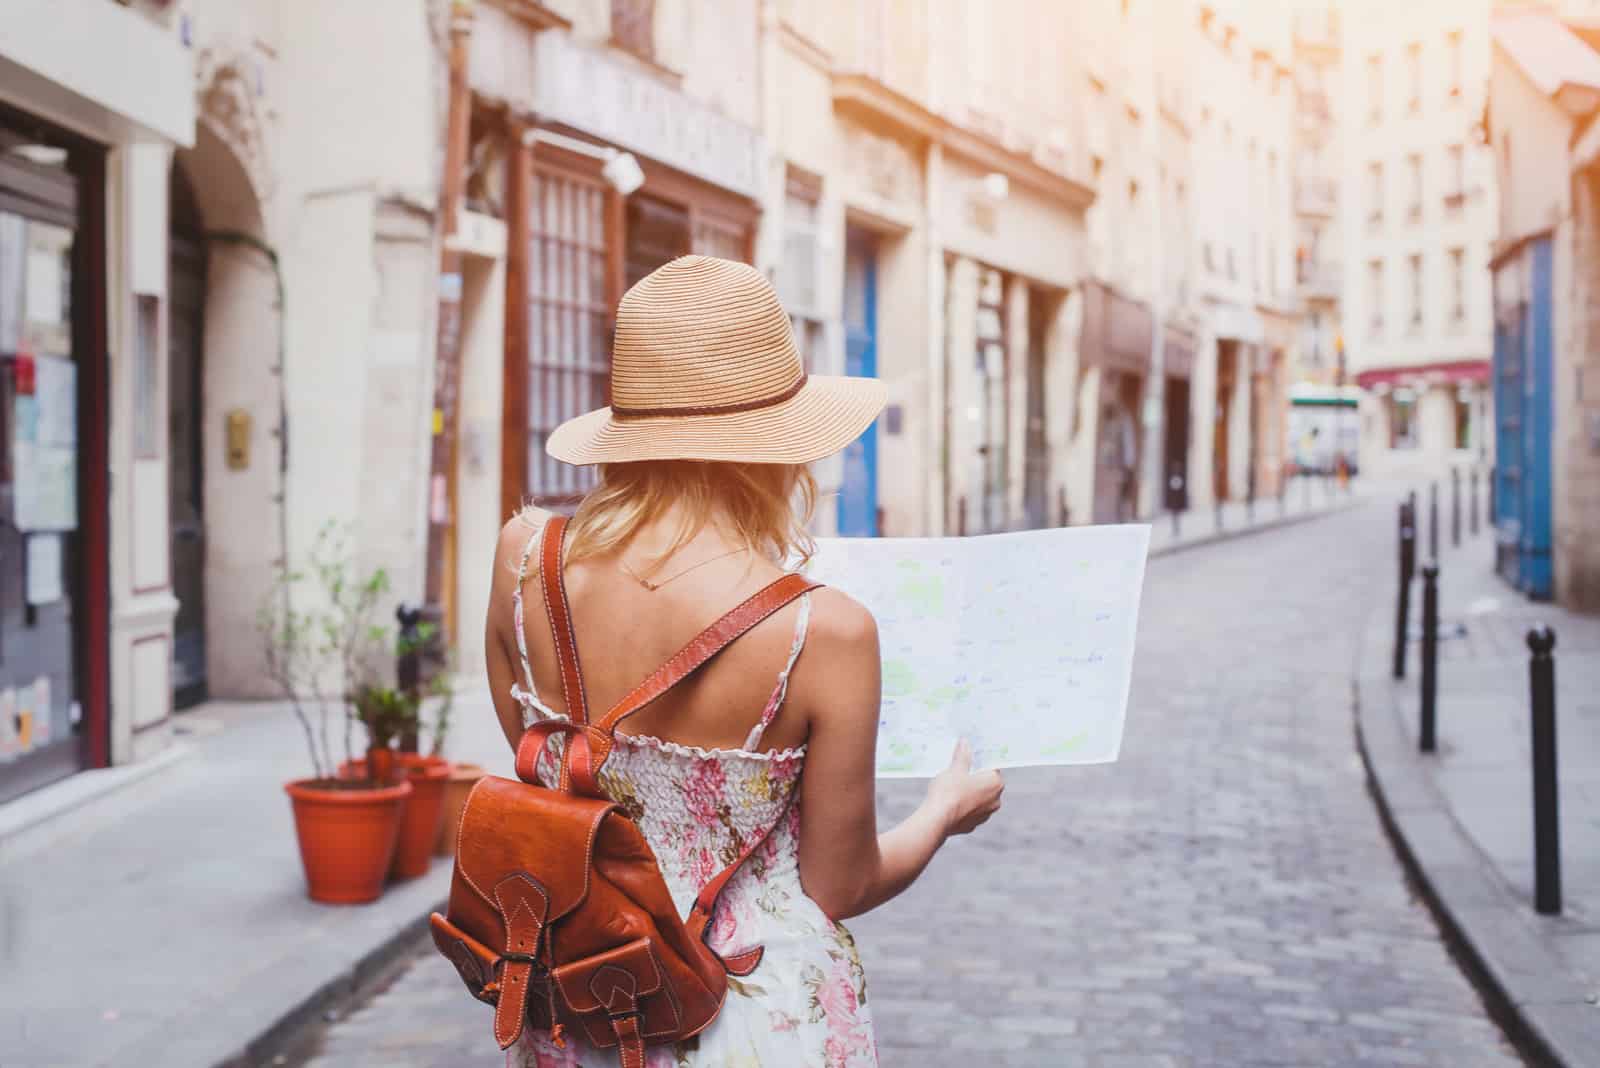 80 Fun Things To Do And Places To Go When Bored